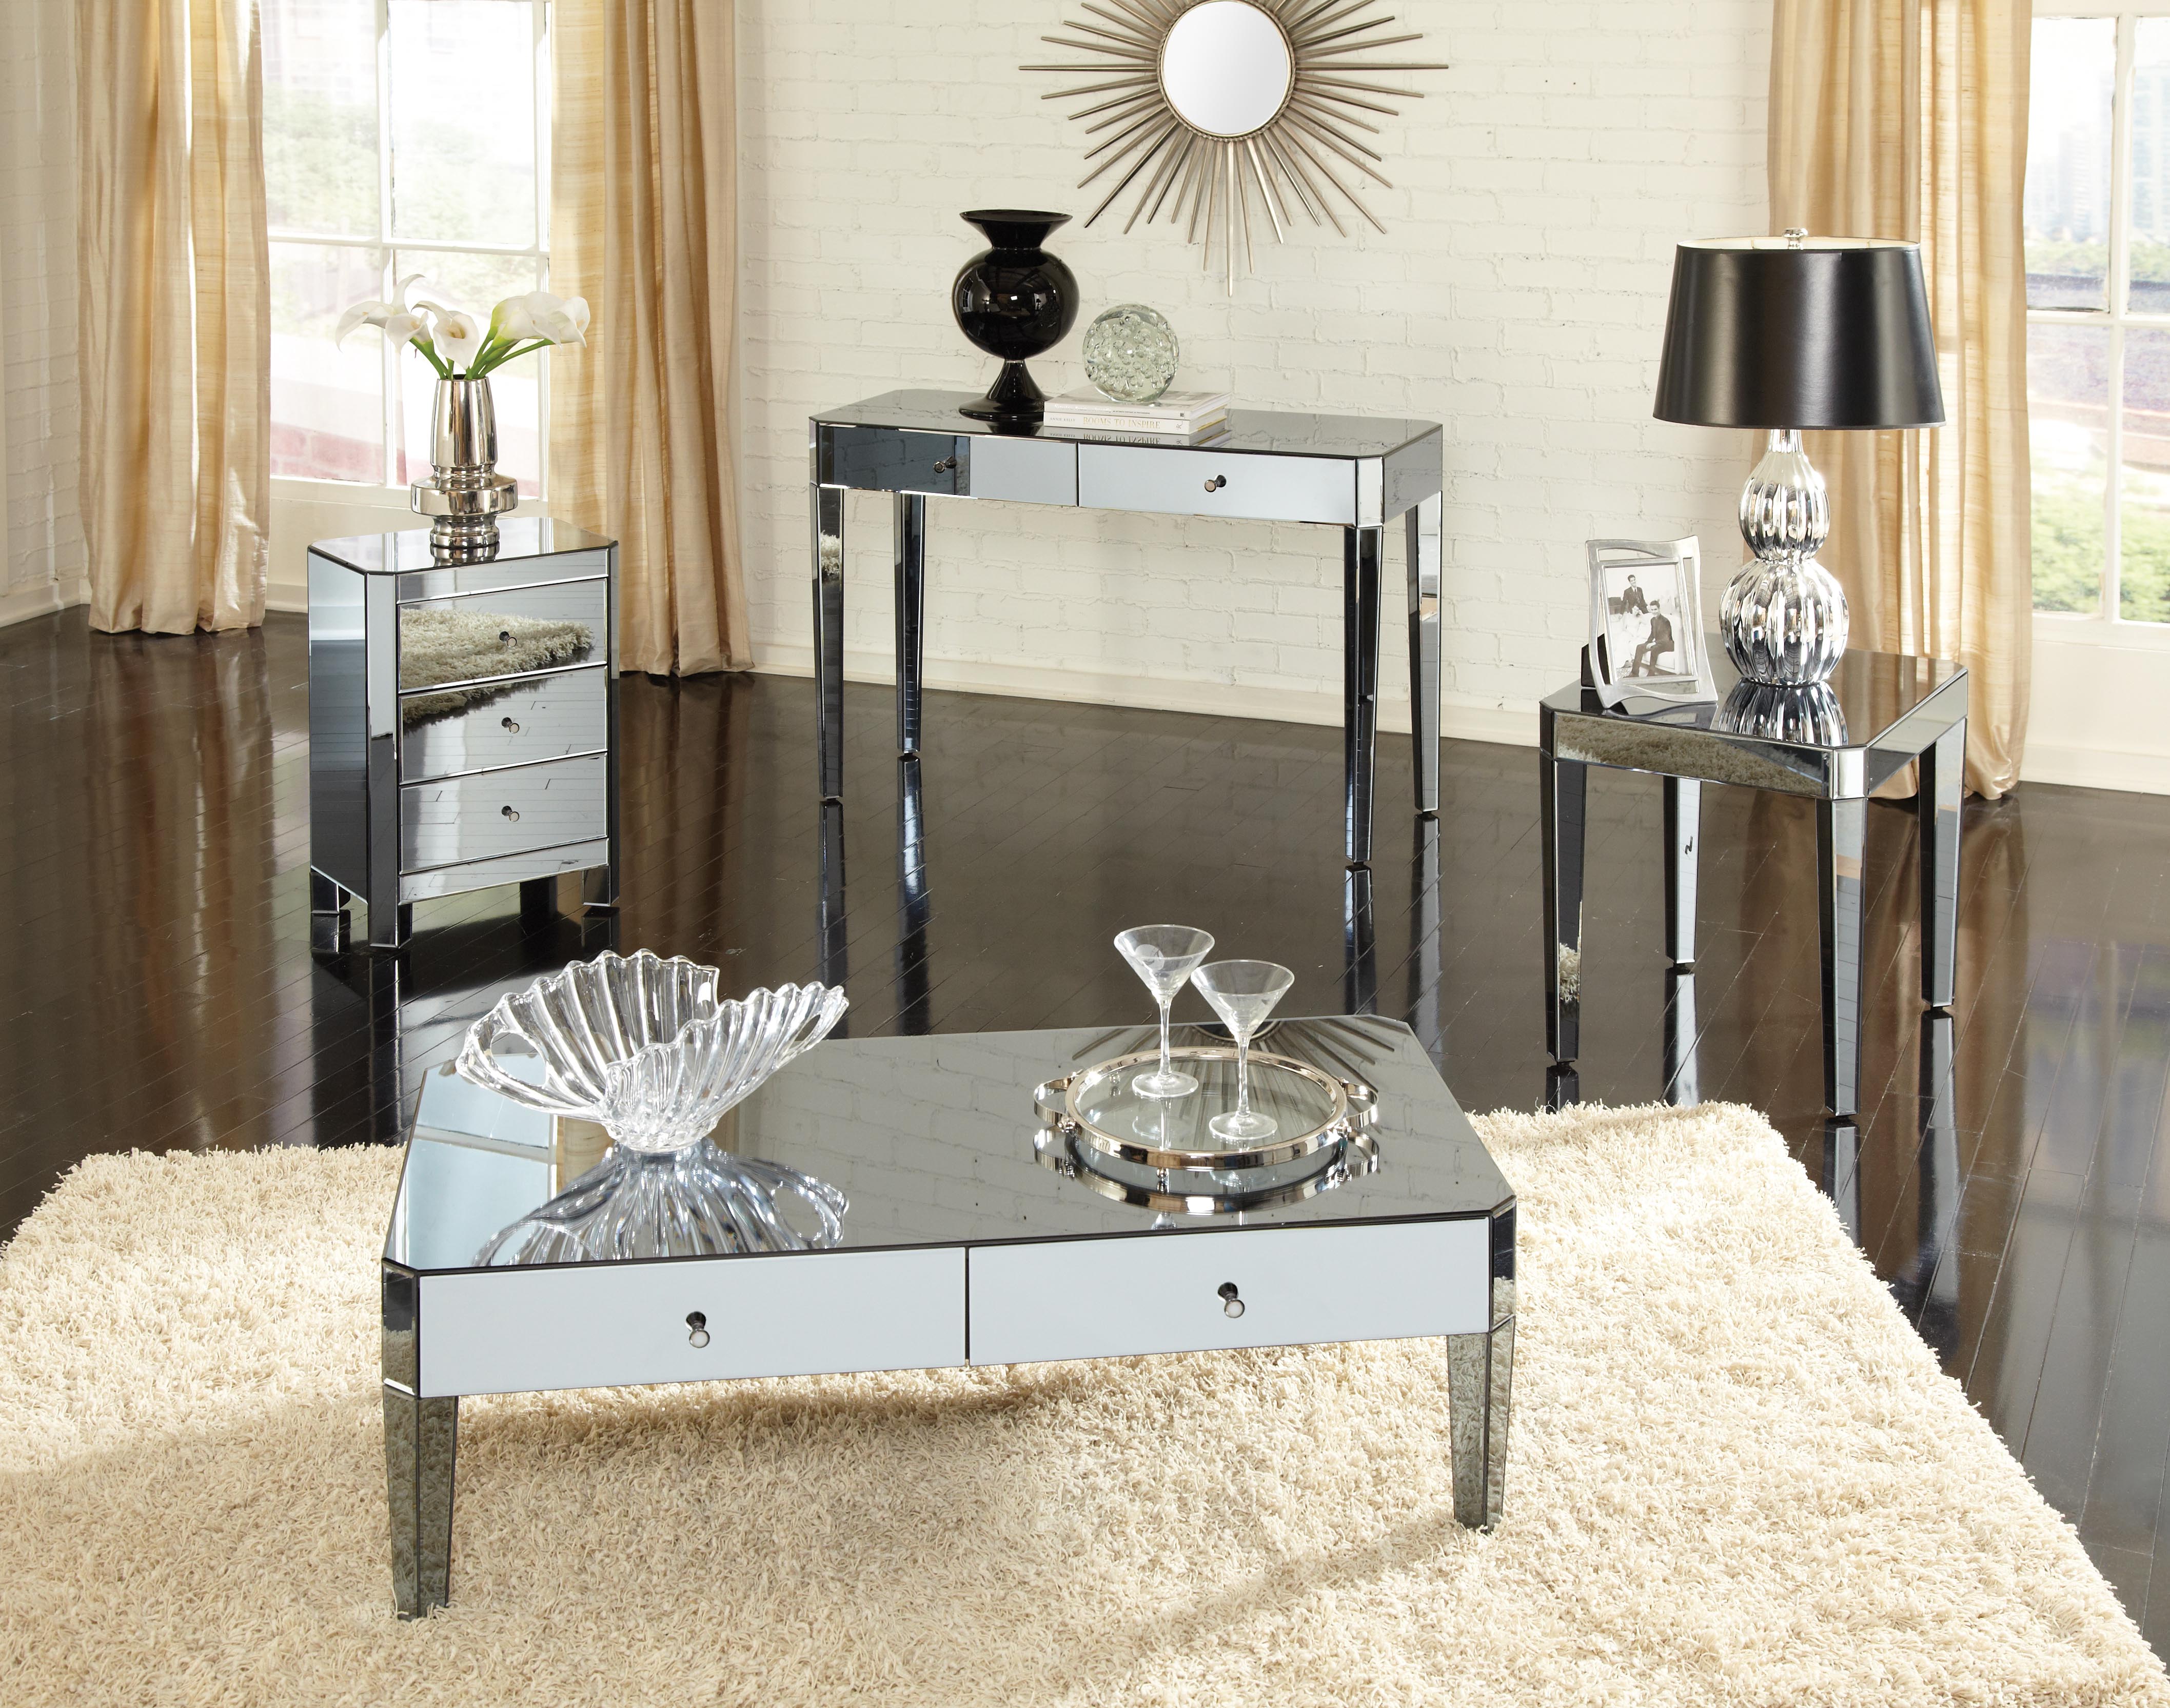 shelf side table the super free target black wonderful mirrored coffee glass nightstand cocktail pascual silver nightstands nesting tables accent furniture modern style your home